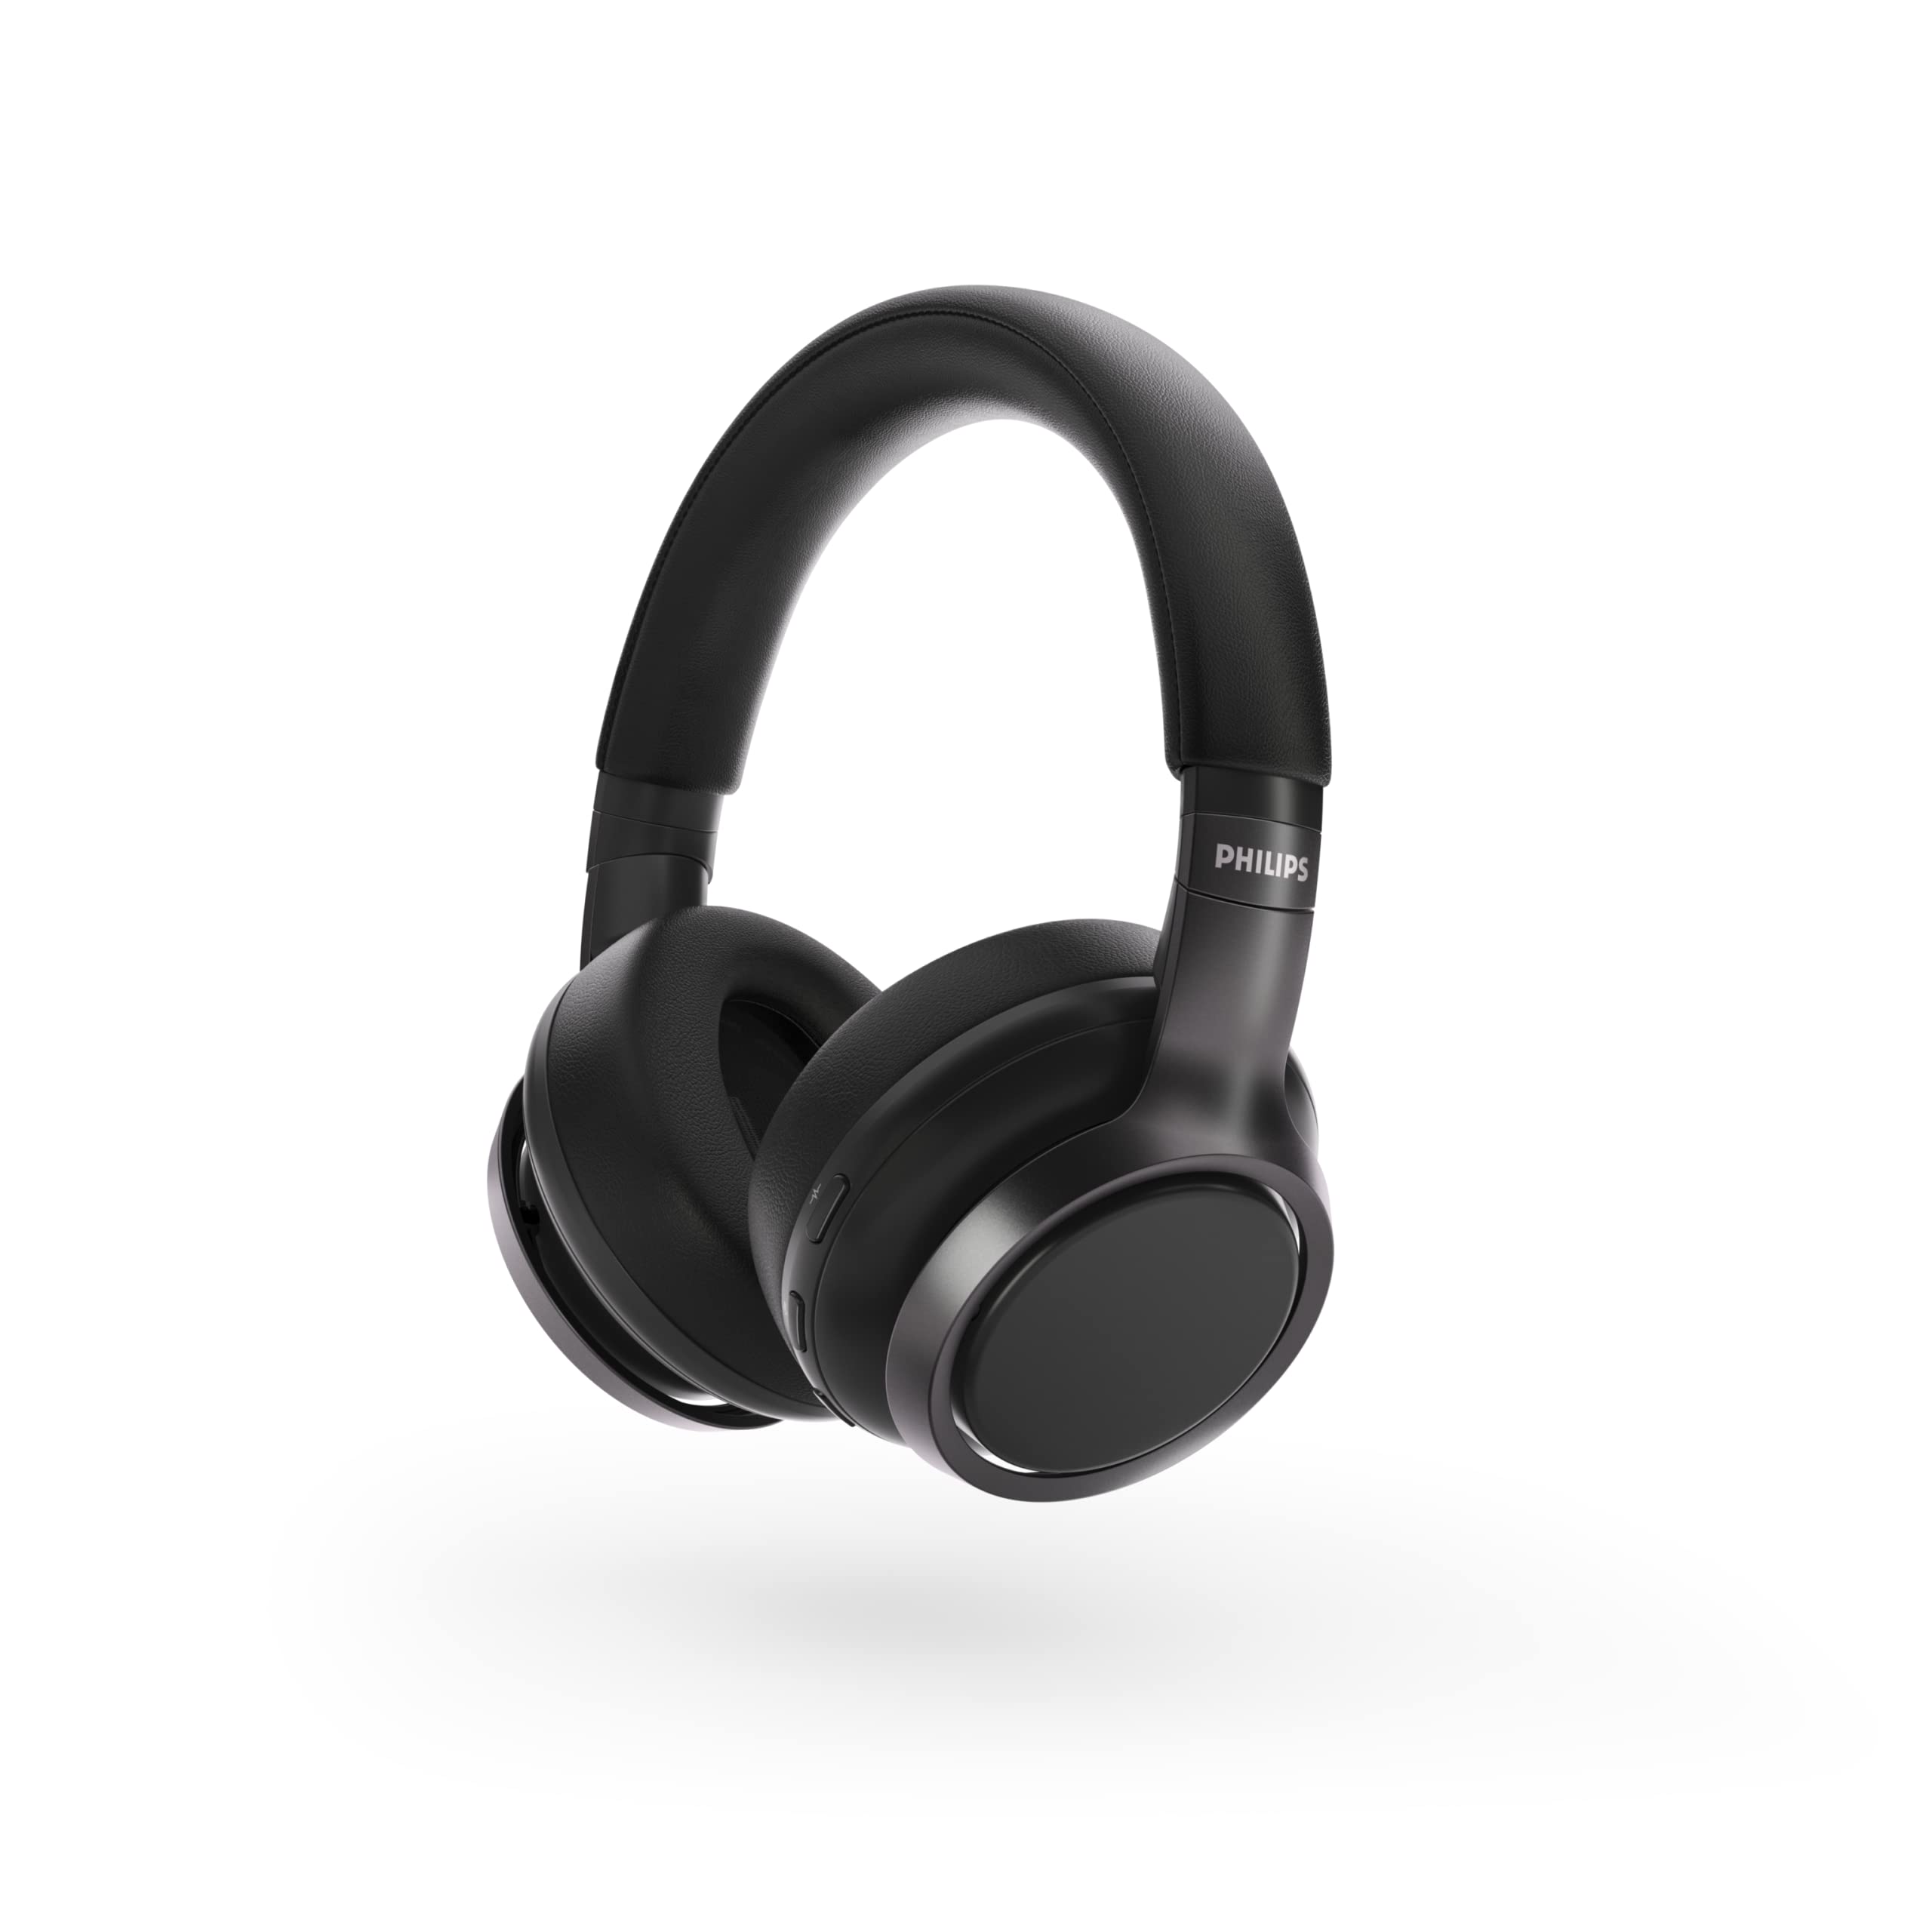 Philips Audio Philips H9505 Hybrid Active Noise Cancell...